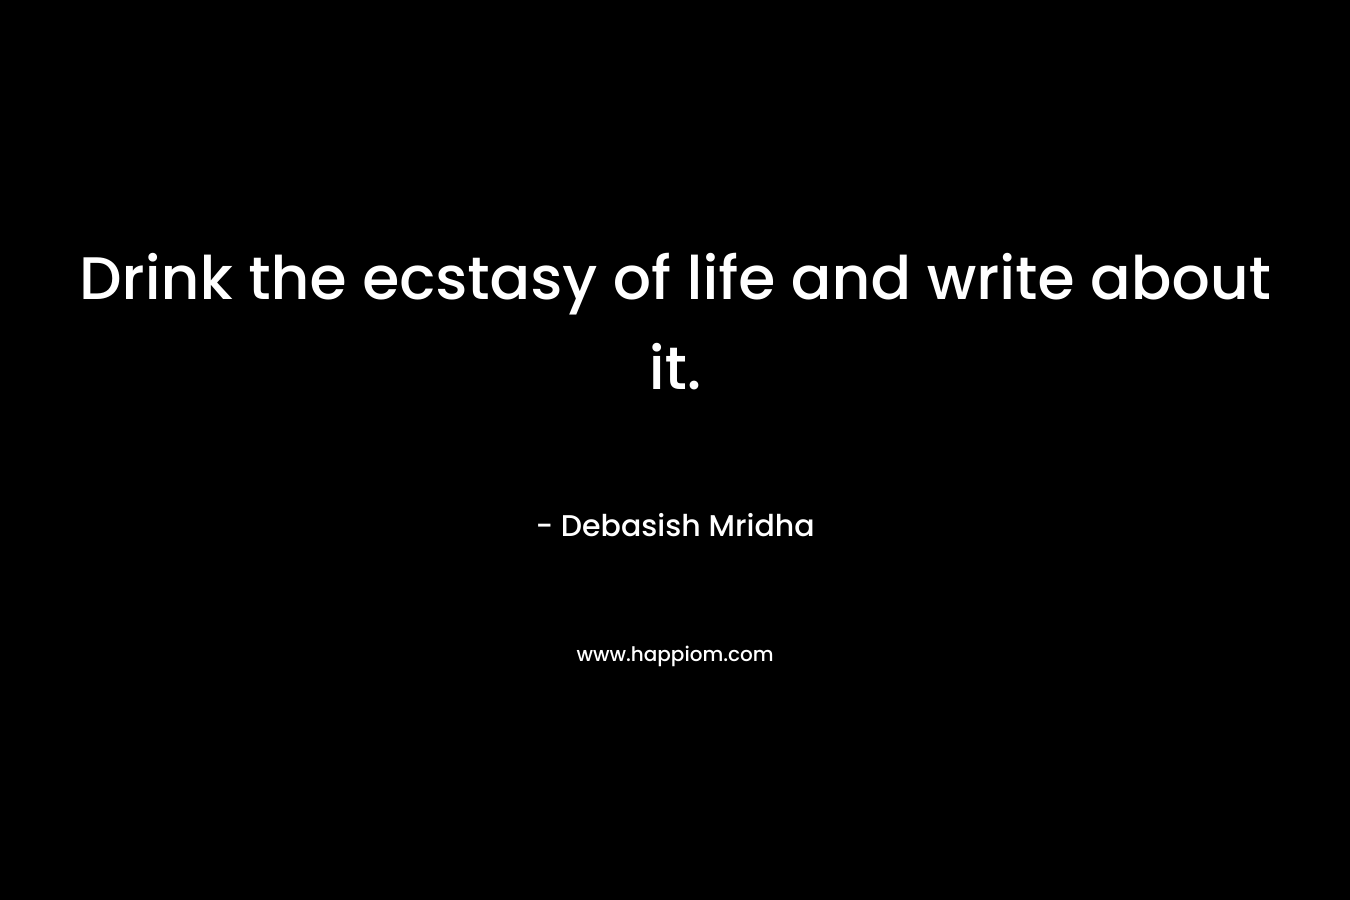 Drink the ecstasy of life and write about it. – Debasish Mridha